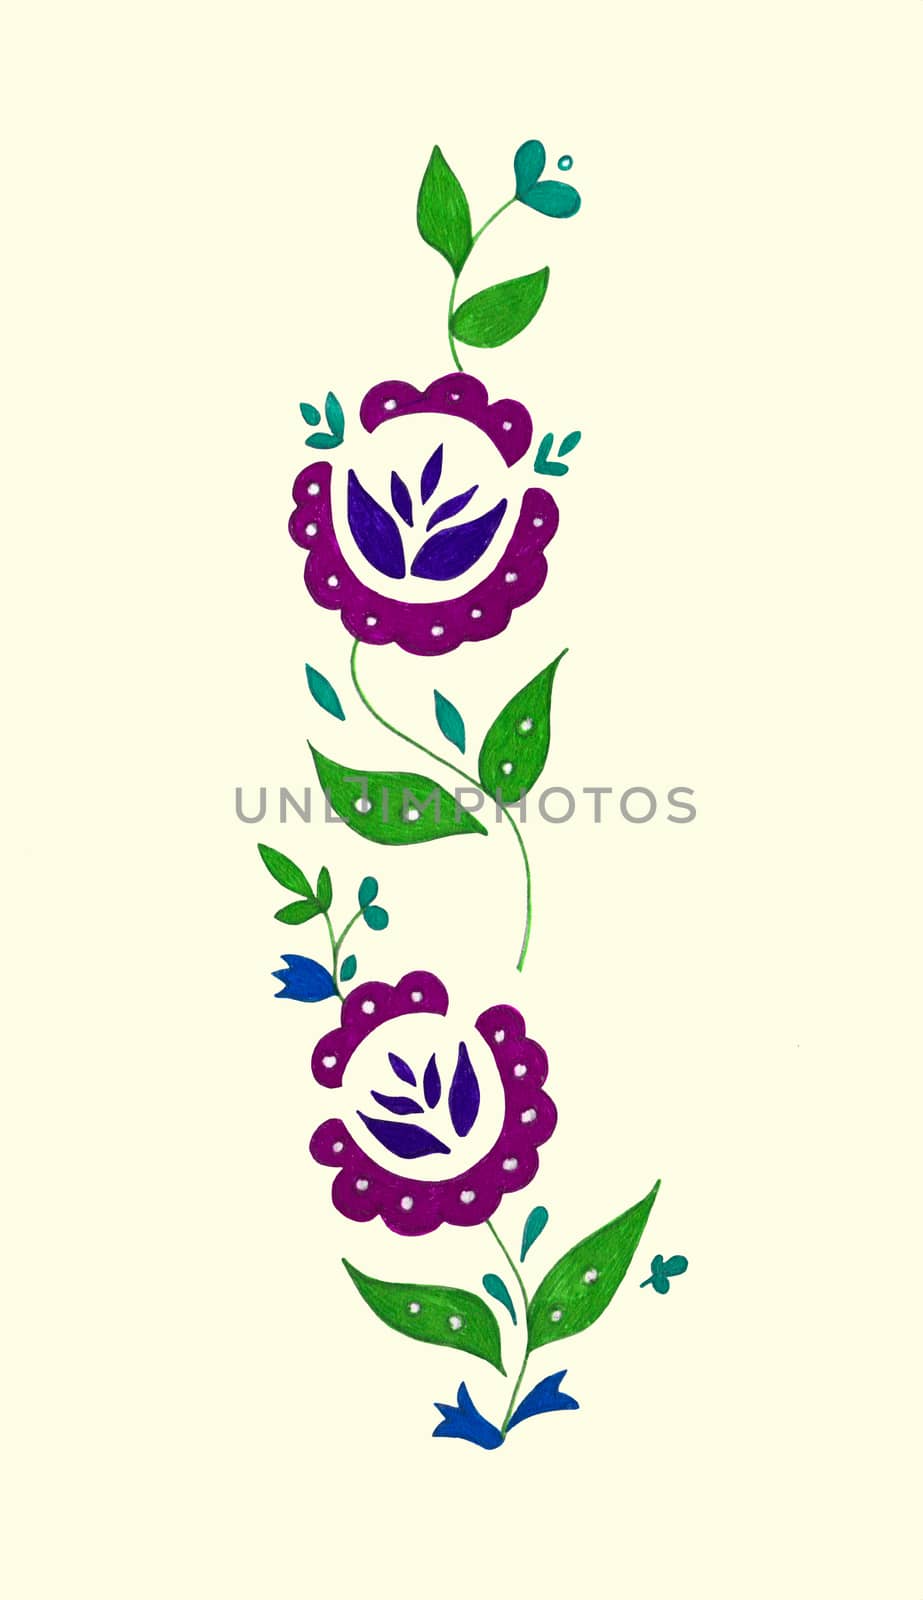 Decorative composition of abstract doodle flowers and leaves. Floral motif illustration. Design element. Hand drawn vertical ornament isolated on light creamy background